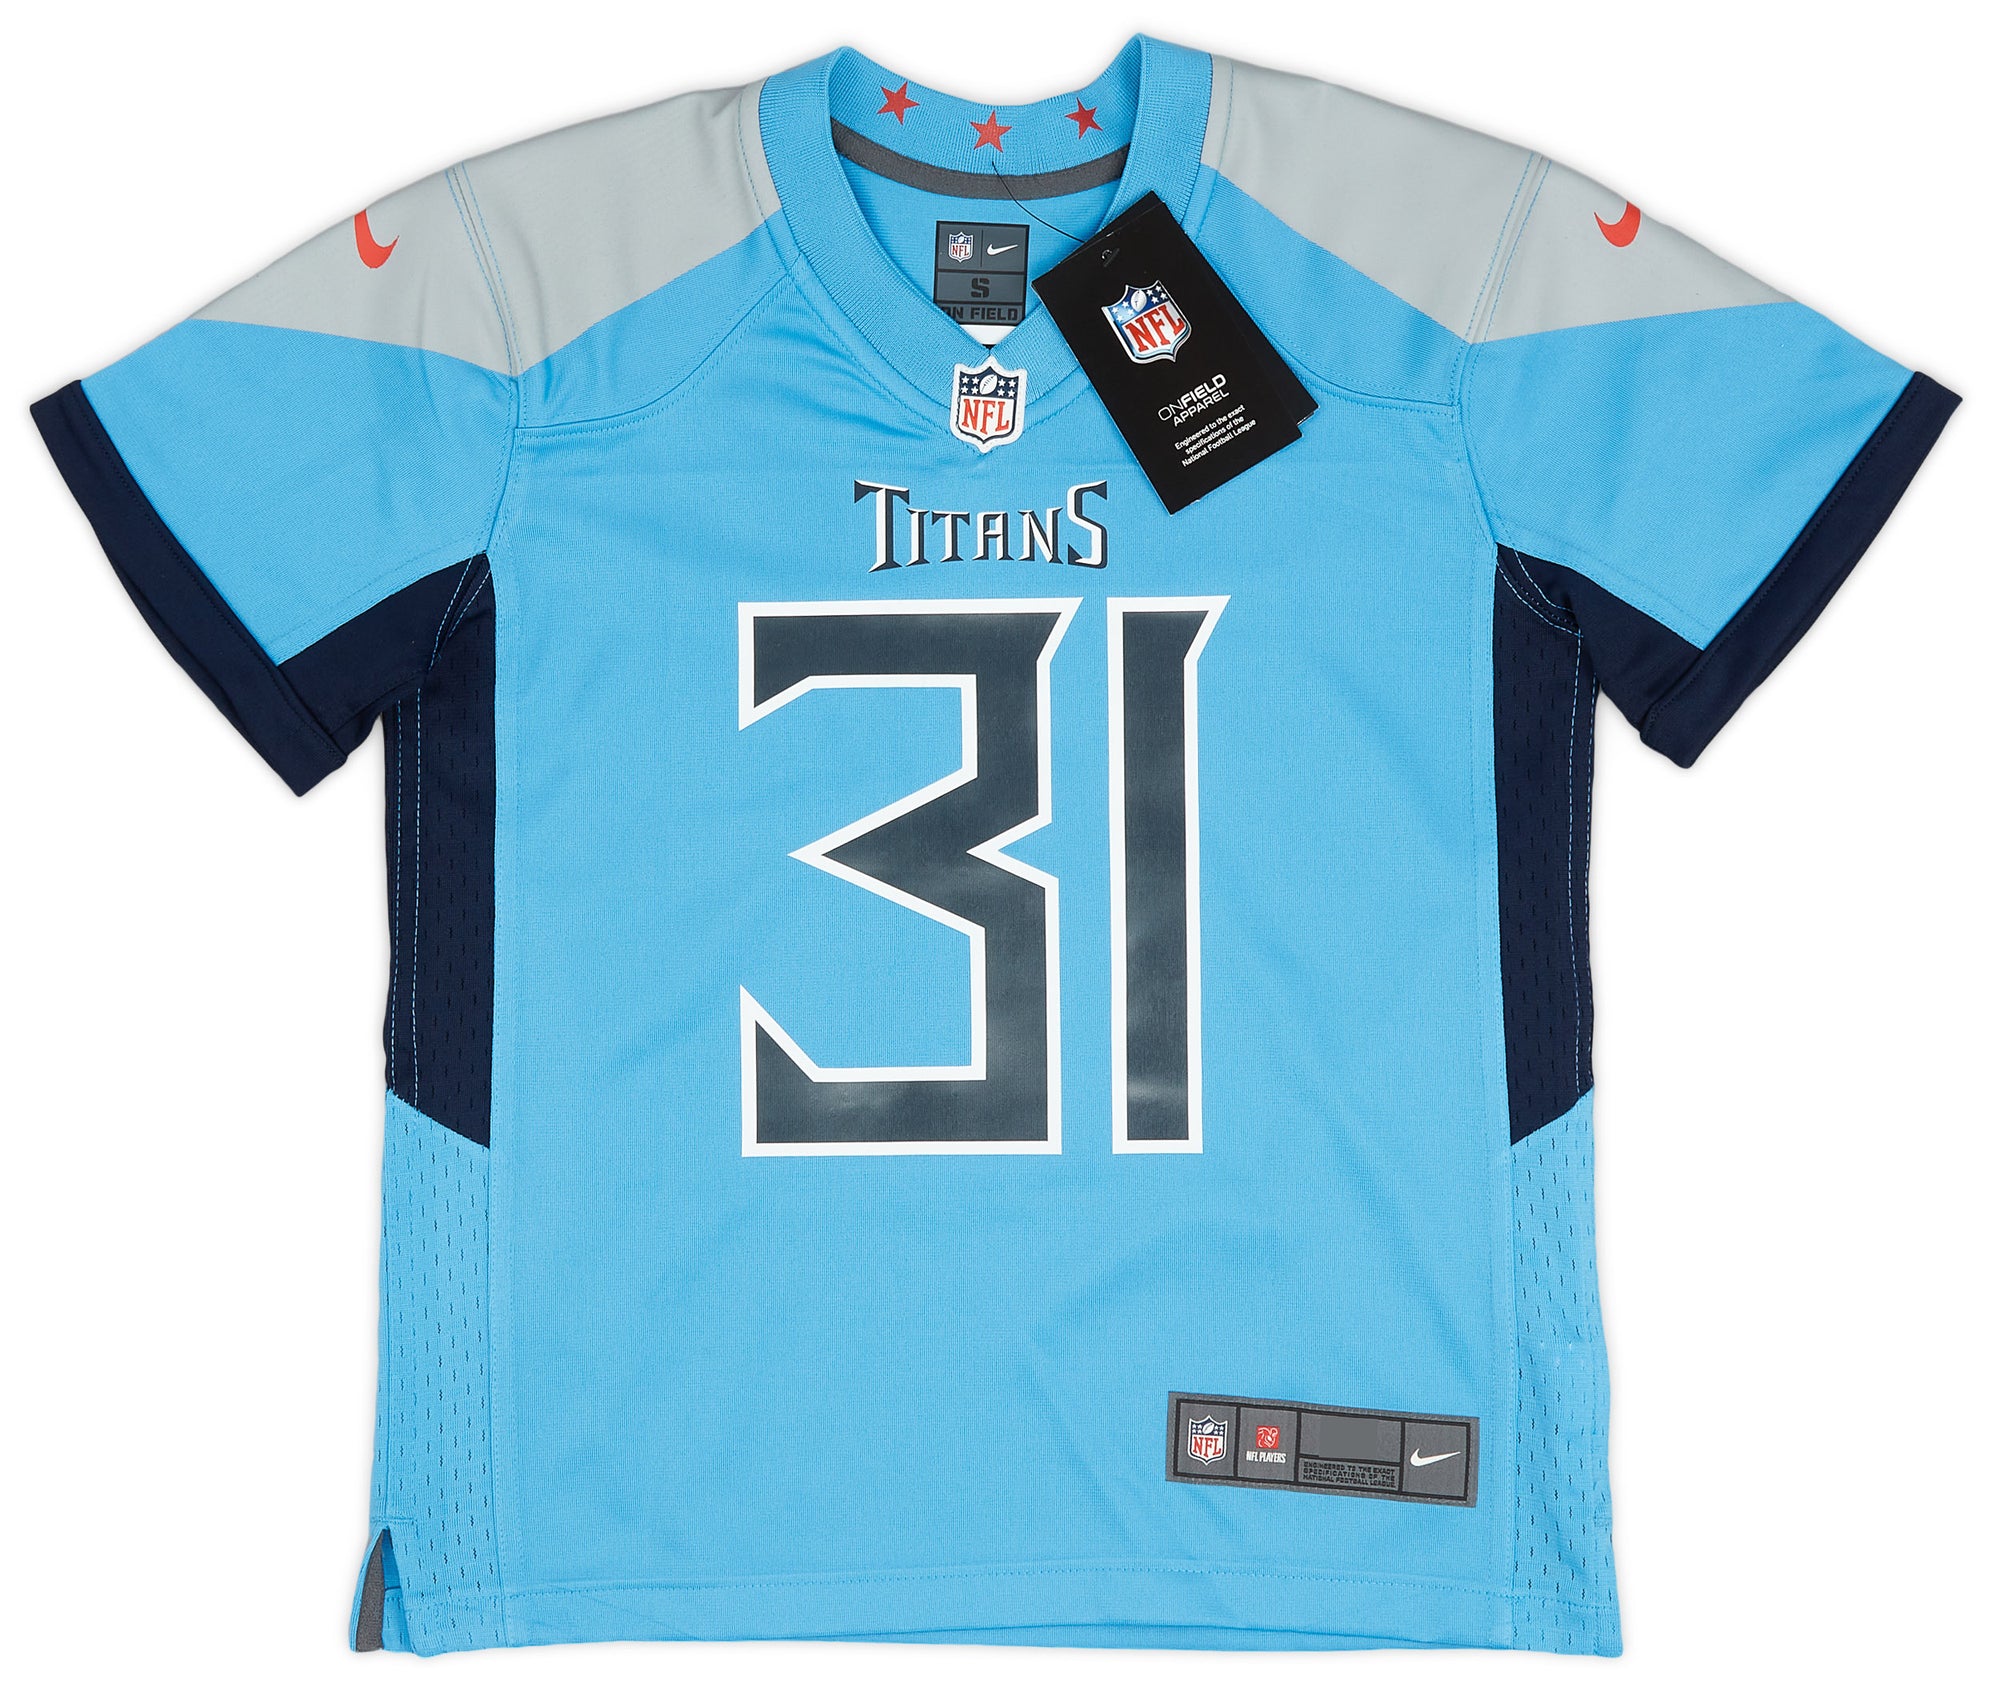 2018-23 TENNESSEE TITANS BYARD #31 NIKE GAME JERSEY (ALTERNATE) Y - W/TAGS